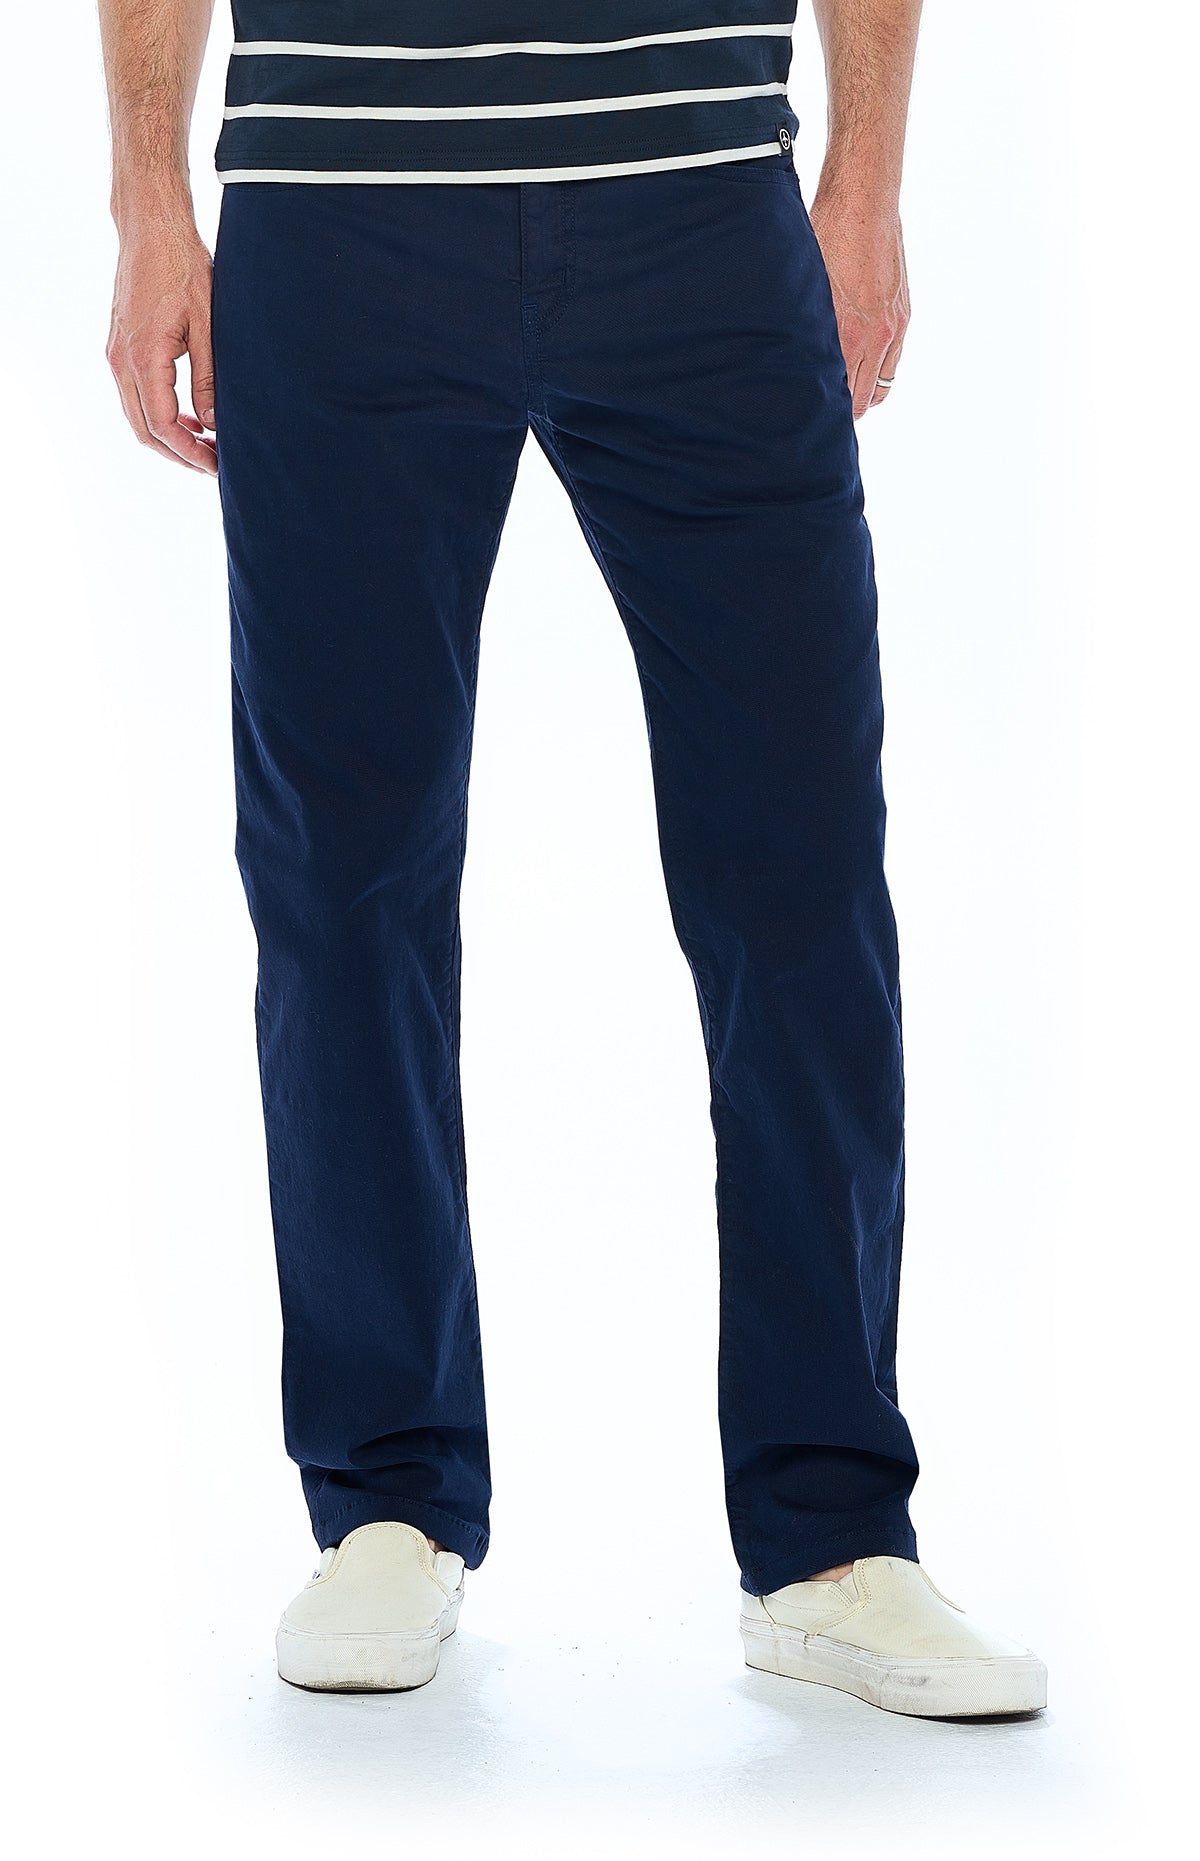 Aviator men's best travel jeans in navy blue made of Japanese twill